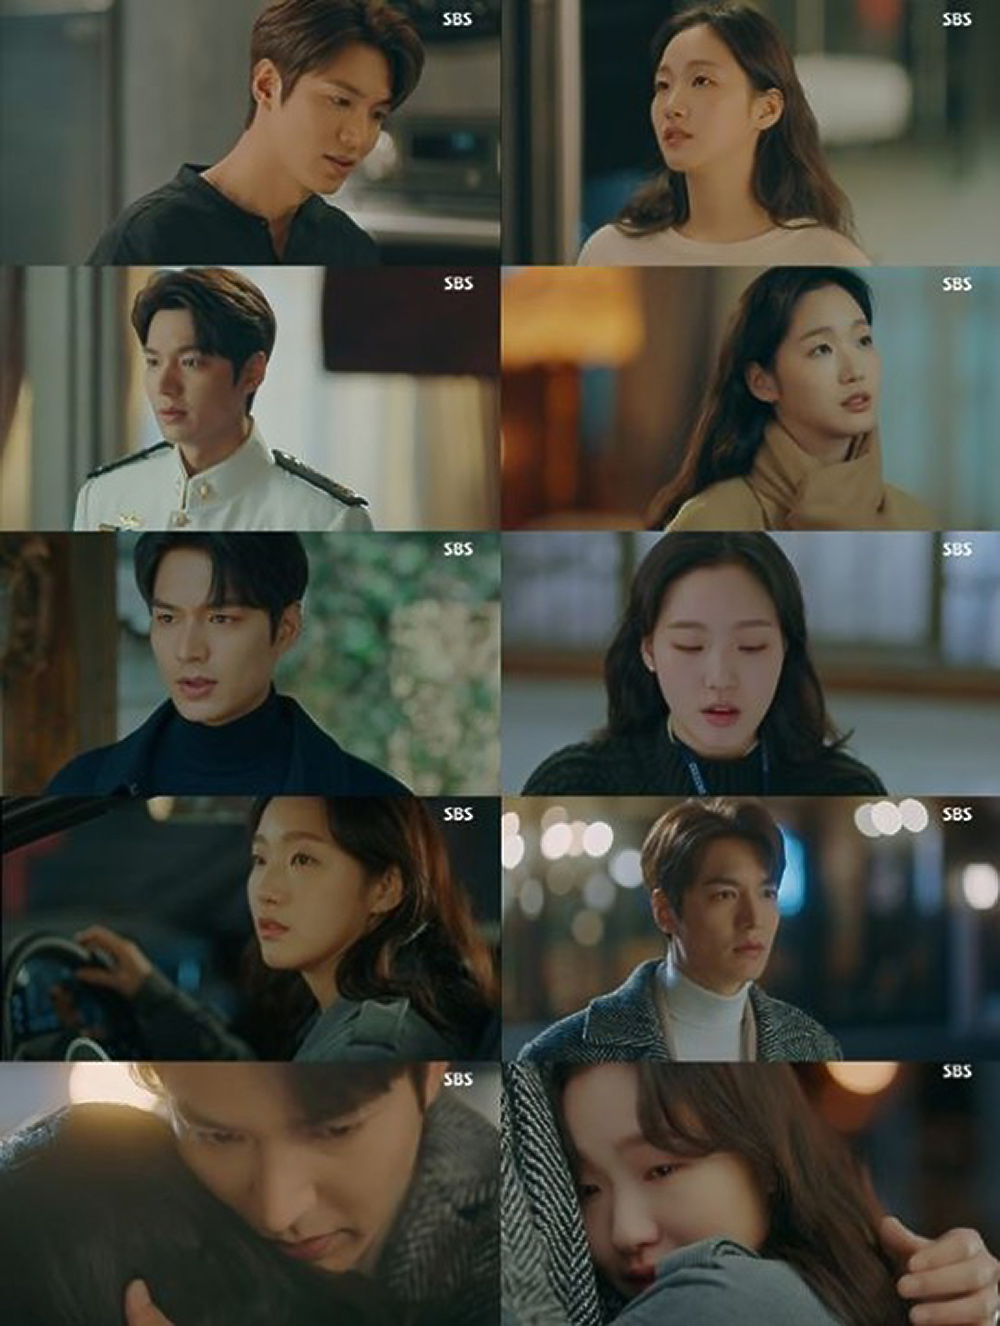 Lee Min-ho and Kim Go-eun, the monarchs of the King-Eternity, exploded their heartbreaking emotions with a reunion that crossed the Korean Empire and South Korea.The 6th SBS Golden Land Drama The King - Eternal Monarch, which was broadcast on the last 2 days, recorded 7.9% in the Seoul metropolitan area, 10.5% in the second part, and 5.8% in the 2049 audience rating.The highest audience rating at the moment was 11.9%, ranking first in the same time zone for all channels for six consecutive times.On the day of the show, Jung Tae-eul (Kim Go-eun), who came to South Korea after meeting Lee Min-ho at Korean Empire, missed Lee, and Leeon appeared and shared a hug of longing.Unlike the previous one, which was extremely reluctant to touch his body by turning the helicopter, Lee, who had saved Jung Tae, shocked Cho Young (Woo Do-hwan) and Mobiser (Baek Hyun-joo) with a pleasant smile while writing on Jung Tae-euls palm in the helicopter.Then, Jung Tae-eun, who received the dish that Igon had done himself, said, I must have been lonely. In my World. It was quite dark that I could not prove that I was me.Thank you for coming to pick me up. After conveying his desire to be bitter with his forehead kiss, Lee said, I was lonely, and talked about the occasion of cooking and confessed the sick story related to King Kim Chin-king Lee Lim (Lee Jung-jin), comforting Jeong Tae-eul, who was sorry.But at that time, as the emergency NSC (National Security Council) was convened in the provocation of Japan Navy, Leeon wore a Navy uniform and told Jung Tae-eun, Imperial House of Japan wears military uniform at the most honorable moment.I mean, Ill win. Ill be right back. Will you wait? And Jung Tae-eul replied with an uneasy expression, Lets see again.In the Korean Empire, Jung Tae-eun, who said his name that no one could call, said, I thought it was a name I did not call, but it was a name I only asked you to call.Later, Igon showed his willingness to win the Navy warship directly with the flag of the king, and when he worried about the comfort of the Japanese warship, including the contrast, he said, From now on, I am worried about myself.It is not me that you have to keep today, but this sea. Due to the aggressive attack command, the Japanese warship completely withdrew from the Korean Empire territorial waters, and the Korean Empire Navy rang the victory.Jung Tae-eun, who returned to South Korea, turned on the recorded news sound in USB, which is evidence of the case he was tracking, and recalled his first kiss with Igon while watching the 100,000 won bill left by Igon.After the first kiss, Try what I proved. Have you been dating or now? Why dont you answer. Ill tell you? Only you know.I am in love now. I did not know what to do by recalling the heartbeat of Igon.Then, when the news on USB came out that the word North that Lee Gon talked about and Yi Jong-in (Jeon Moo-song) of Buyeong-gun, which Jung Tae-eul searched at the Korean Empire Imperial House of Japan, was surprised.Yi Jong-in, who came to Igon, handed the real body examination book of the reversed Irim, and the real cause of death was not the death of the guards, but the neck was broken by a cervical vertebrae fracture and thrown into the sea.Moreover, Yi Jong-in was shocked to admit that he was confused and hidden in front of the strange body, which had a history of congenital polio, unlike Lee Lim, who was a great man and an uninhabited man of the gangol.Igon, who saw the real optometrist again, said, The concern of the road palace was right. I became dangerous.The reverse Irim is alive, and what added to Irim was the door to another World. He felt that Irim would come to find the half of Igons food.Then Igon came back to South Korea and showed up at work and said, How are you?I waited? and Jeong Tae-eul ran to Igon with the longing of the past and made a sad reunion. The concern of the road palace is wrong.The ending of the two heart-wrenching hugs, which are saddened by Lees words, I am not dangerous to me, but I am dangerous to Jung Tae-eun!, raised expectations for the next episode.